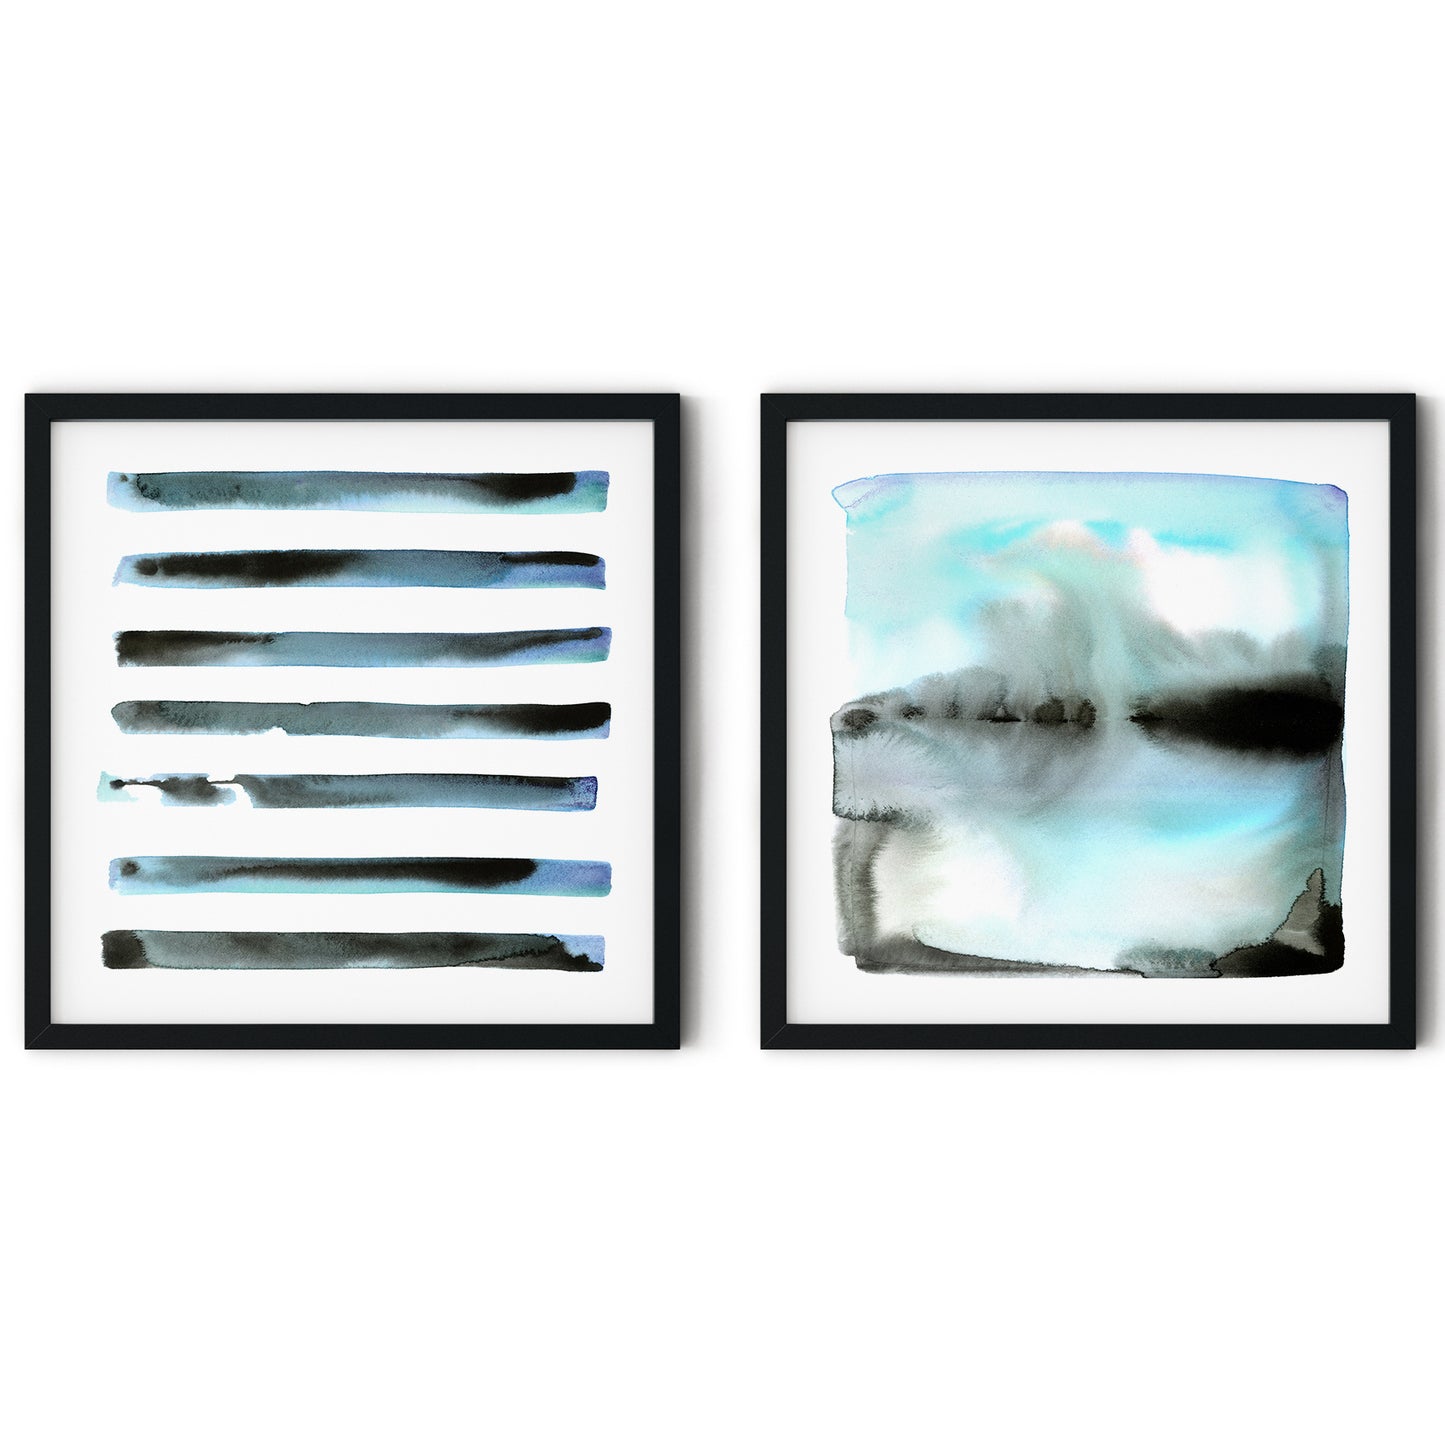 Set Of 2 Abstract Square Prints, Modern Wall Art on Canvas, Contemporary Painting, Grey, Turquoise, Blue, Office Decor